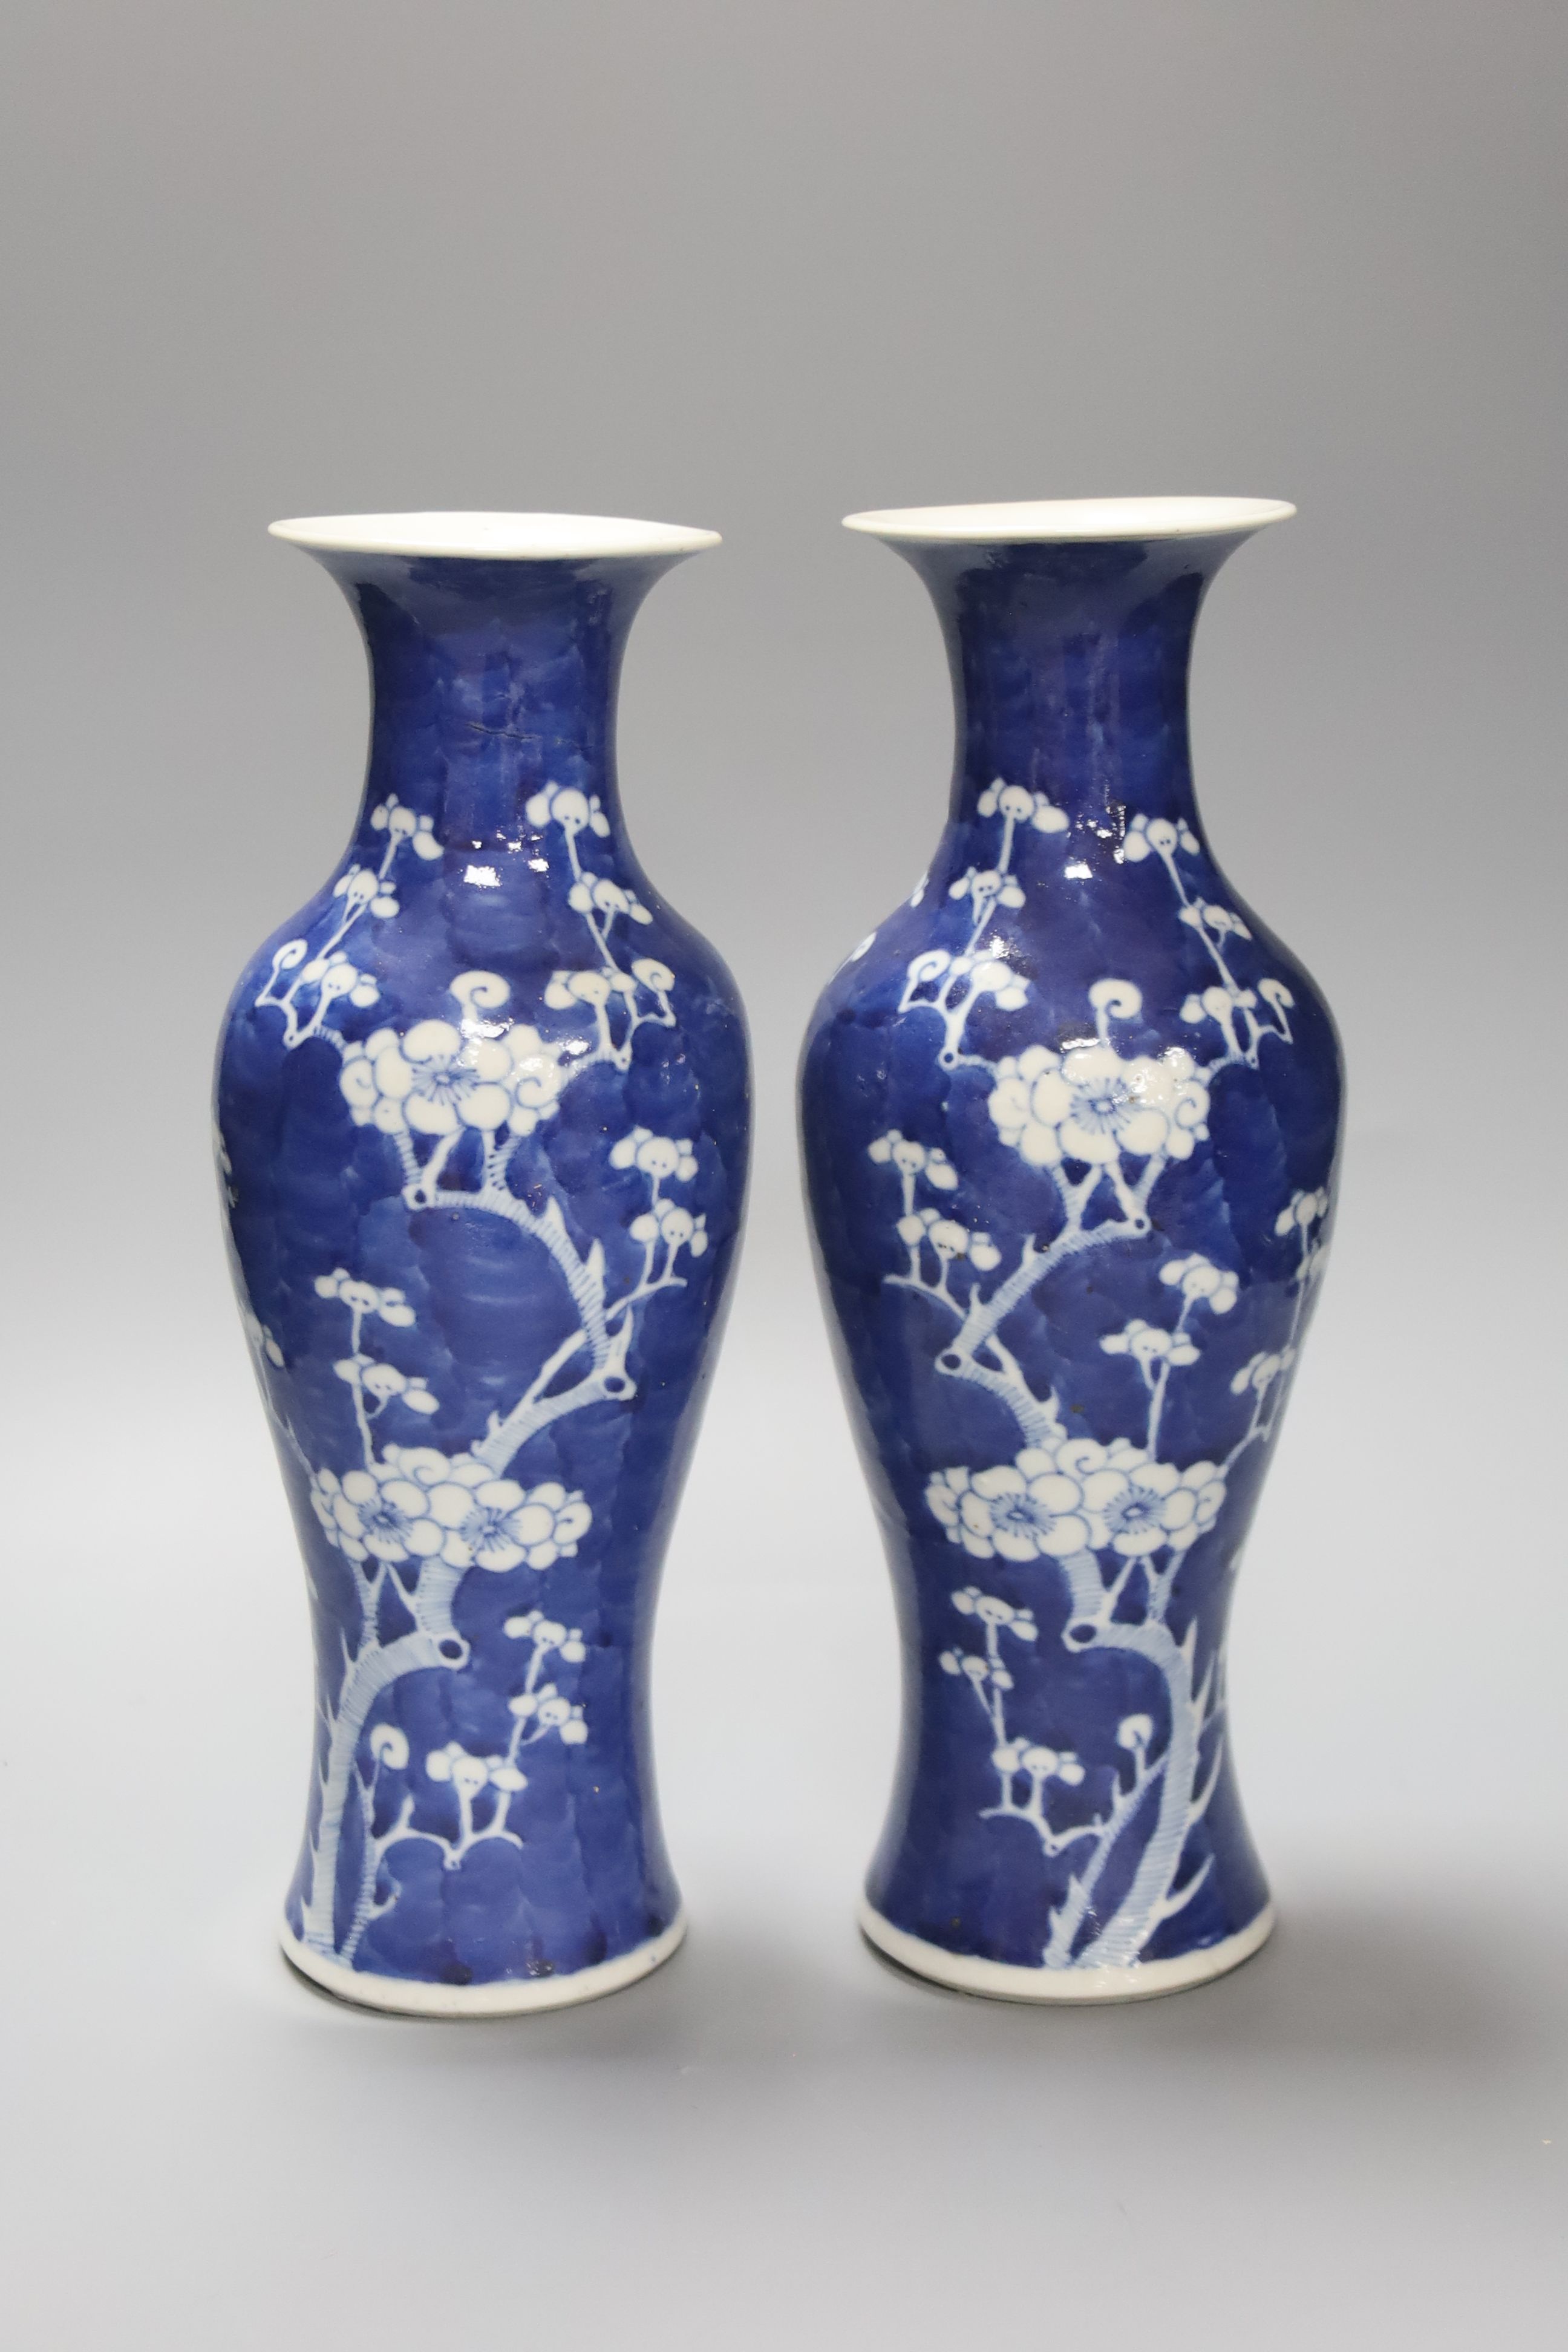 A pair of slender Chinese blue and white prunus vases, late 19th century, height 30cm